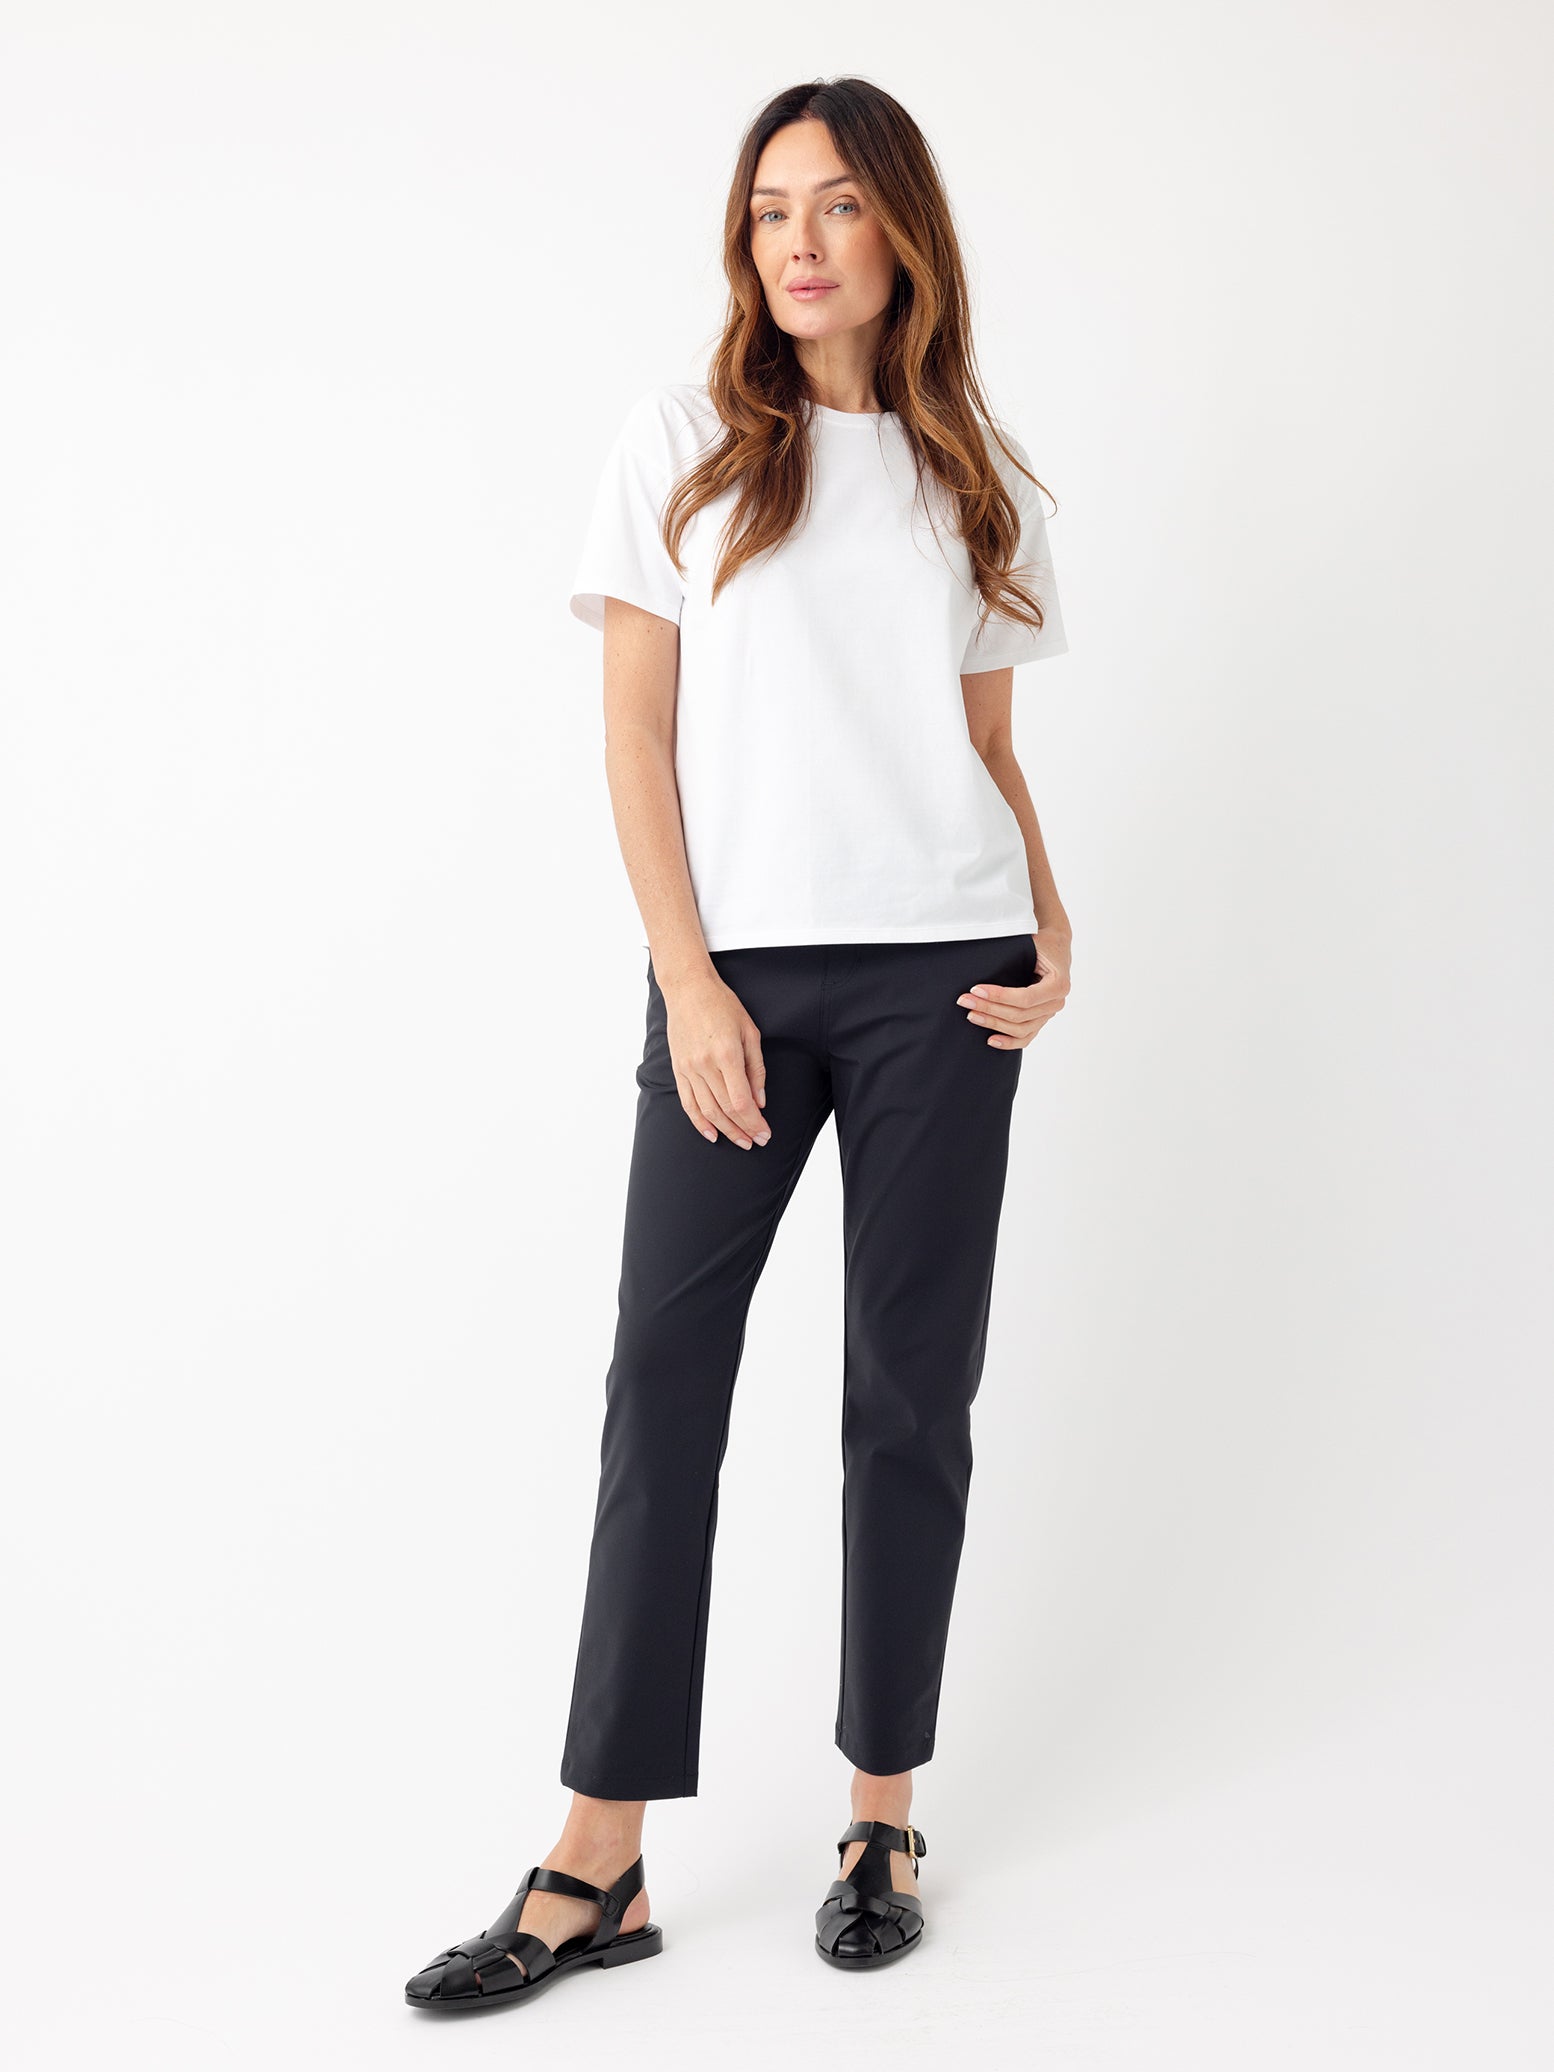 Woman wearing white tee and black pants with white background 